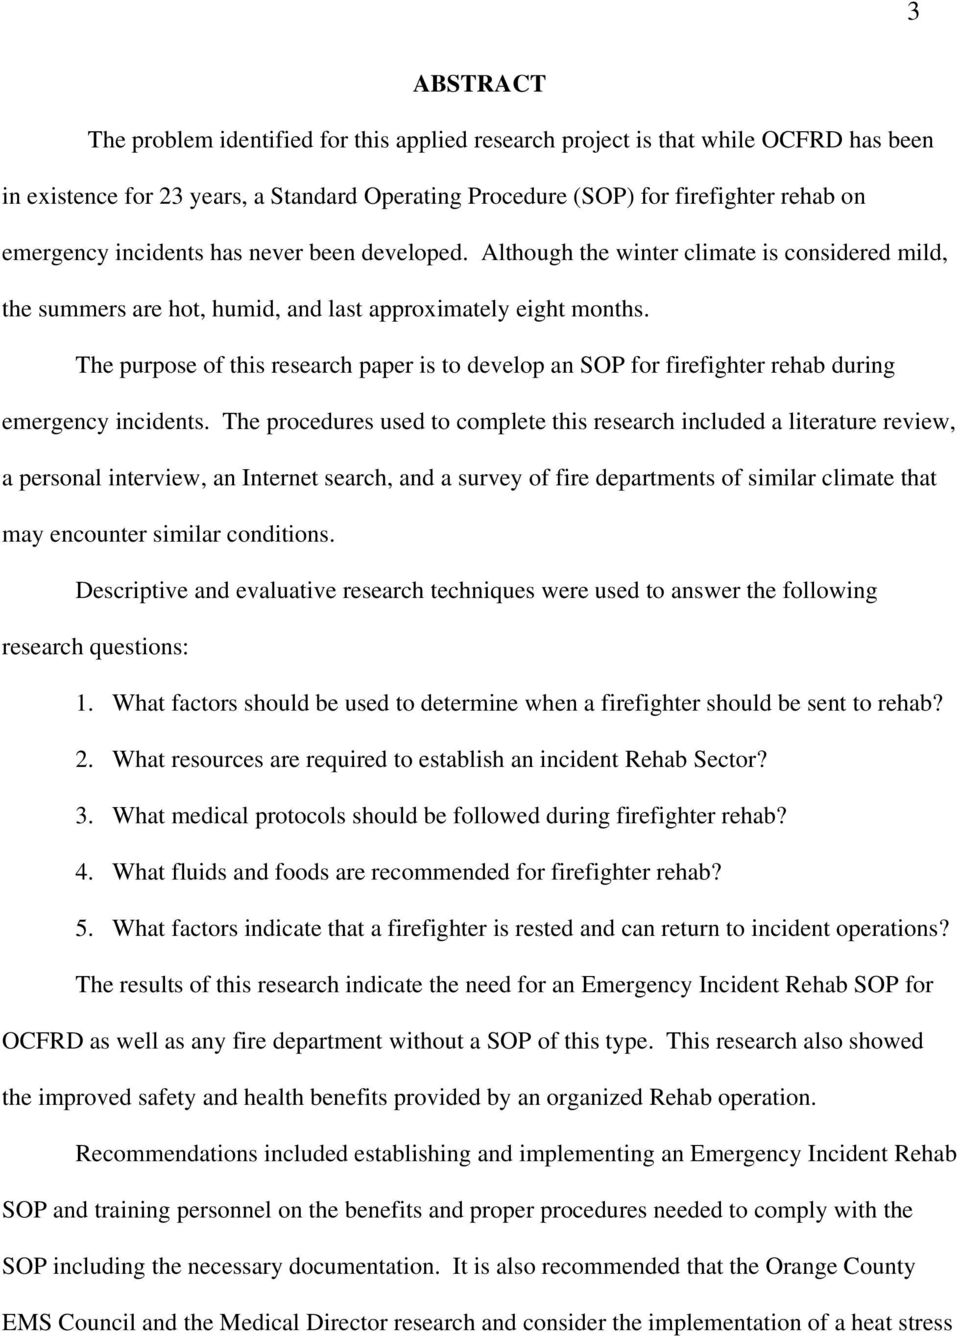 The purpose of this research paper is to develop an SOP for firefighter rehab during emergency incidents.